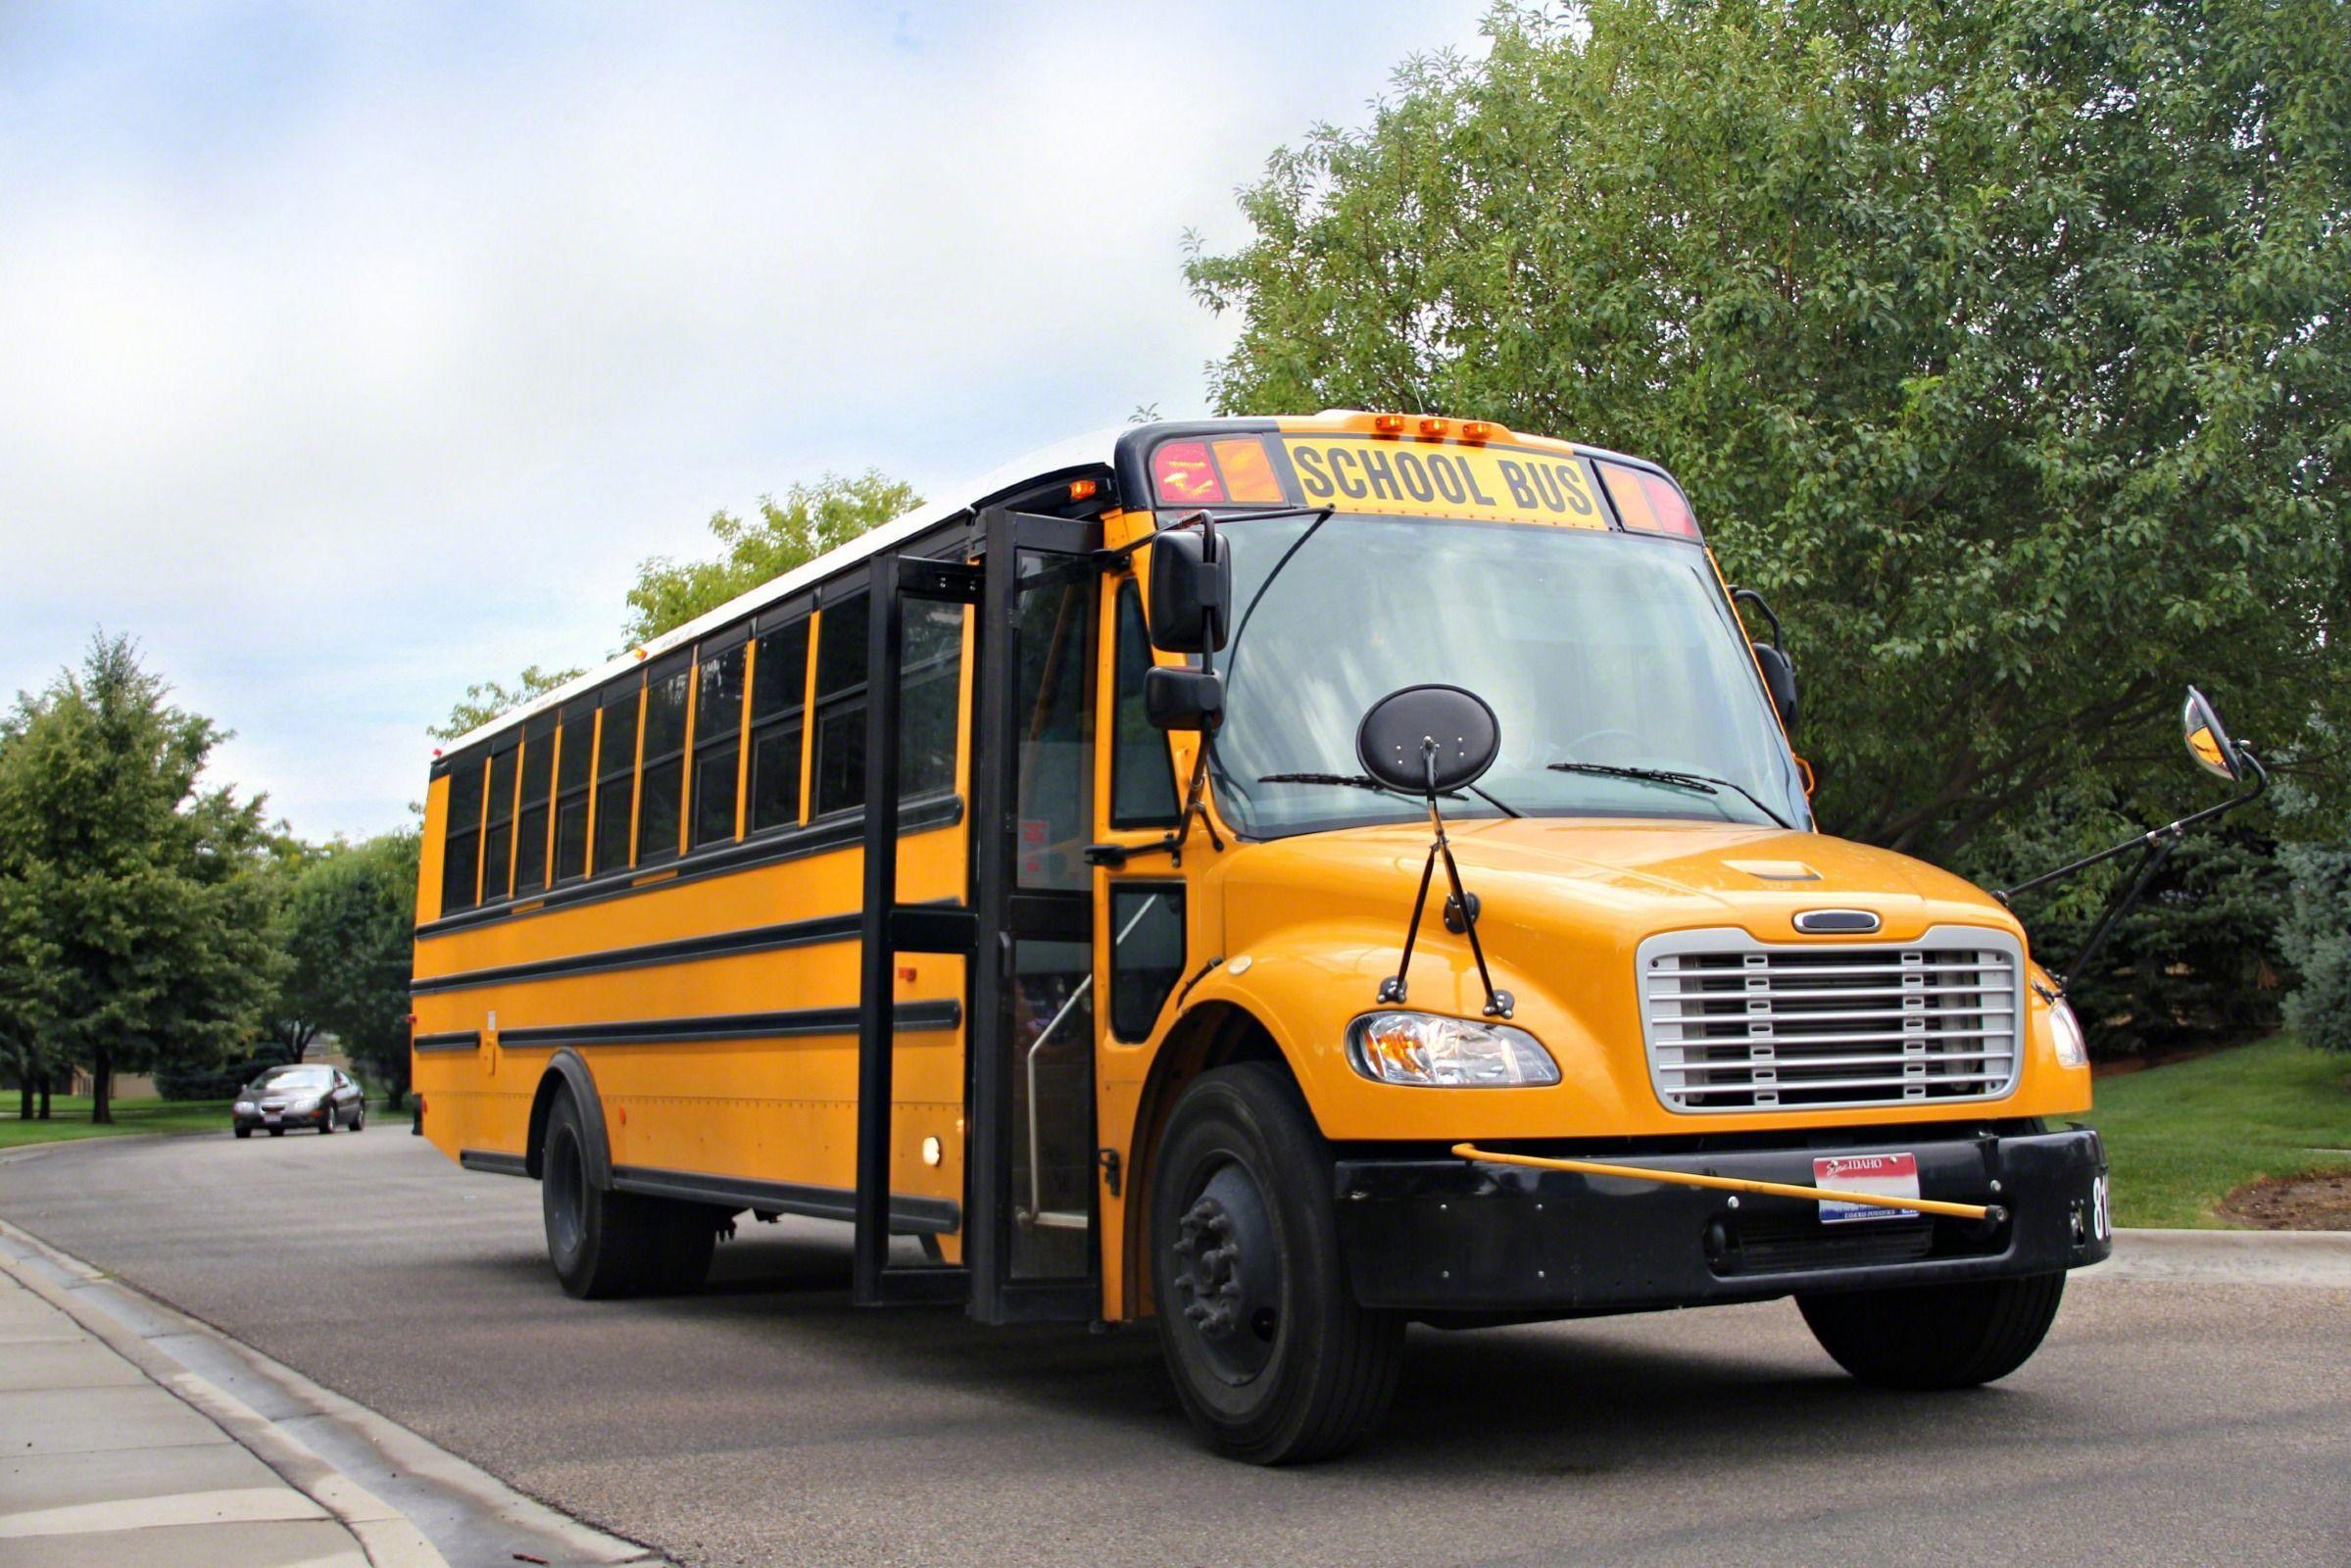 School Bus Safety. Town of CardstonTown of Cardston